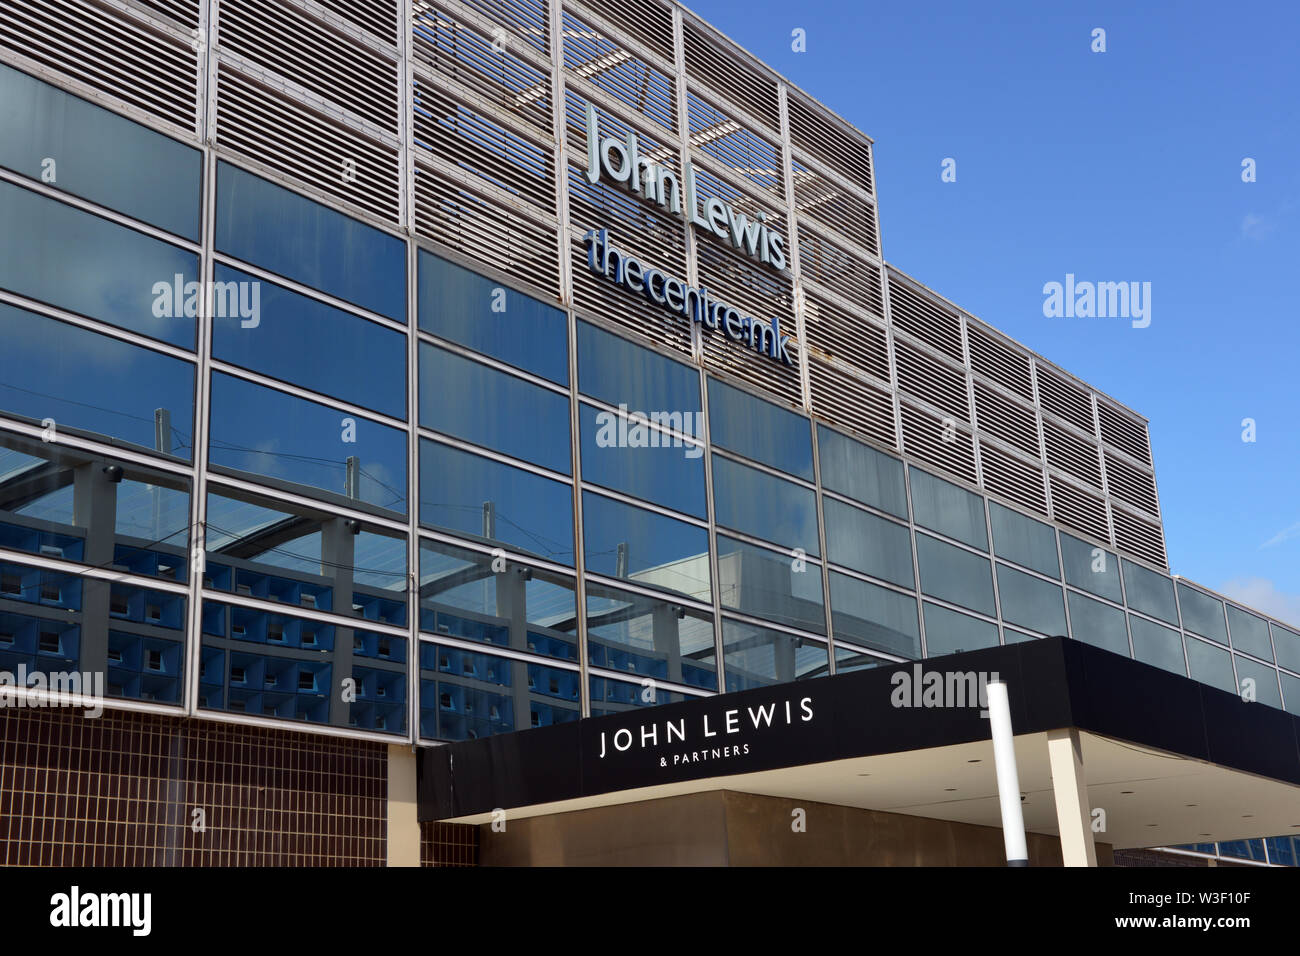 The exterior of the John Lewis department store in Milton Keynes at the grade II listed Centre MK building that opened in 1979. Stock Photo